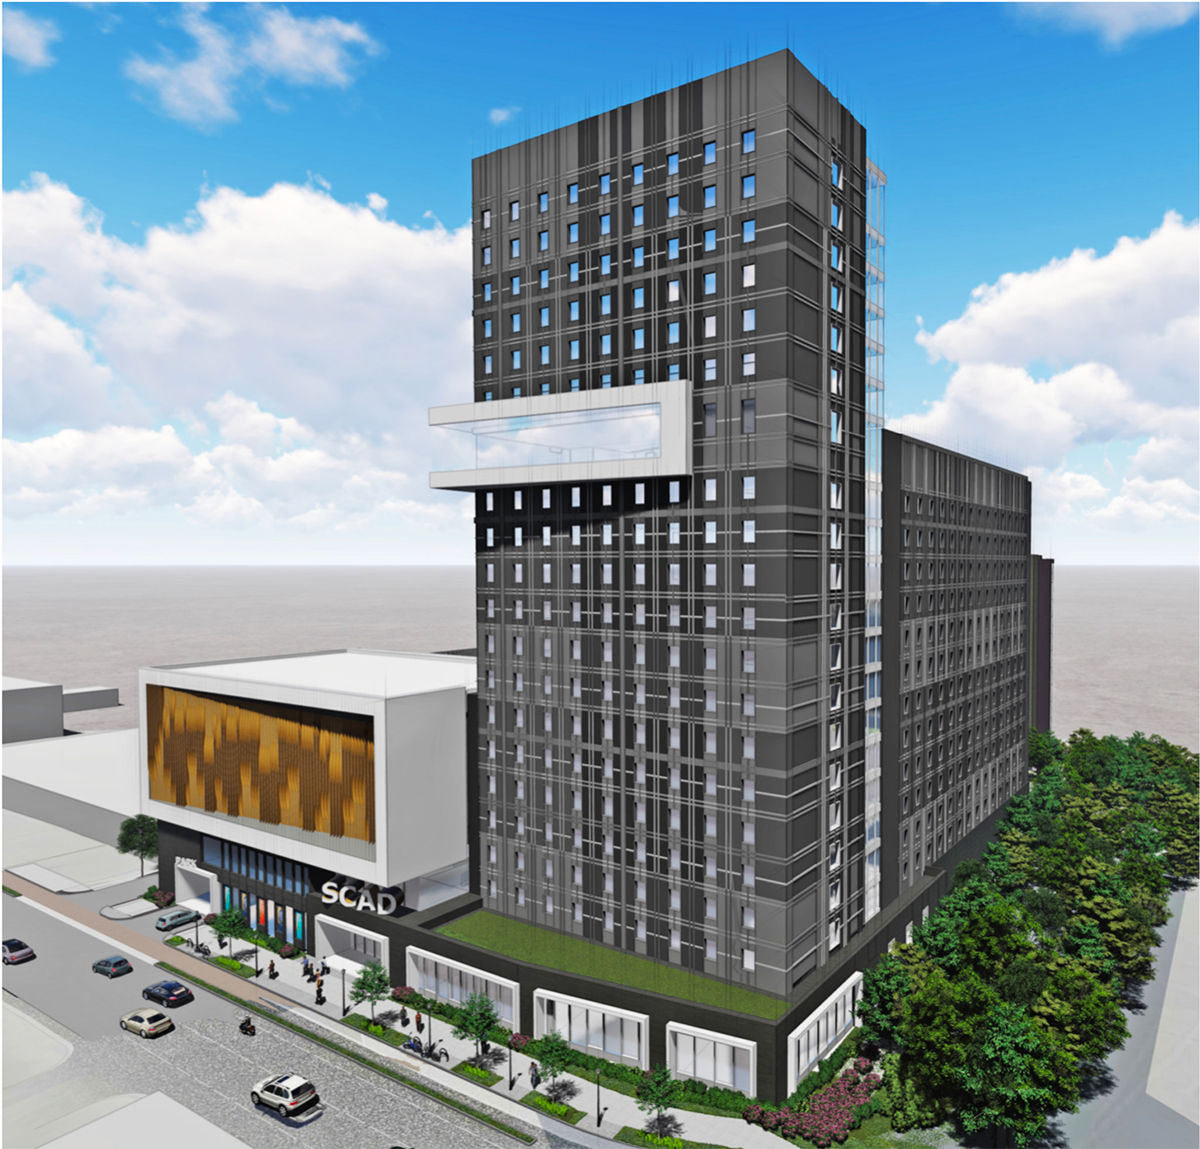 The Midtown Development Review Committee on November 12 saw designs for a 20-story mixed-use project by the Savannah College of Art and Design at 1470 Spring Street. The building would rise with the Buford-Spring connector roadway to its north.